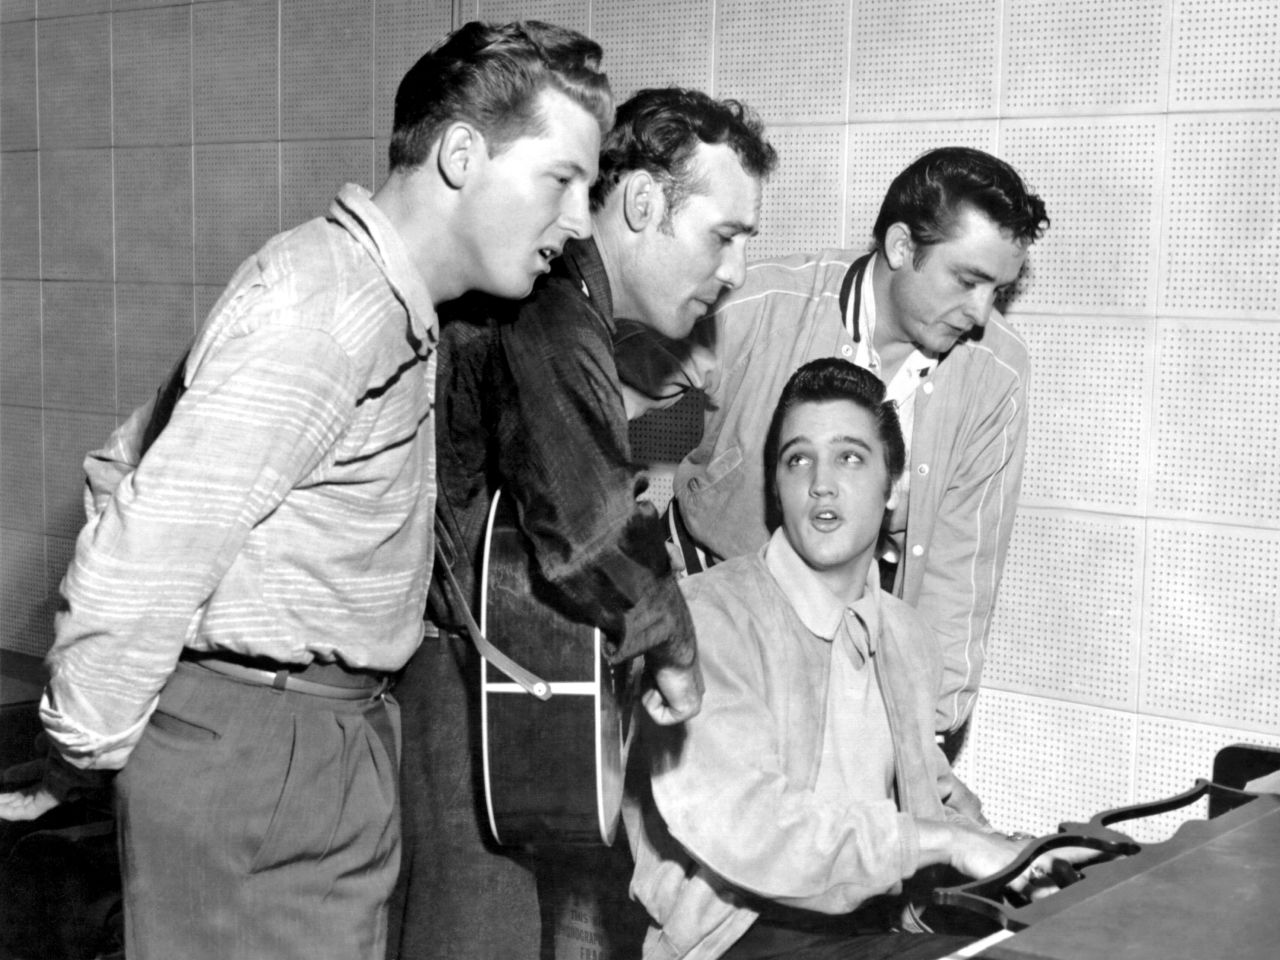 From left, Lewis joins Carl Perkins, Elvis Presley and Johnny Cash for a one-night jam session in Memphis, Tennessee, in 1956. The recording at Sun Studios was called the Million Dollar Quartet, and it became a seminal moment in rock history.